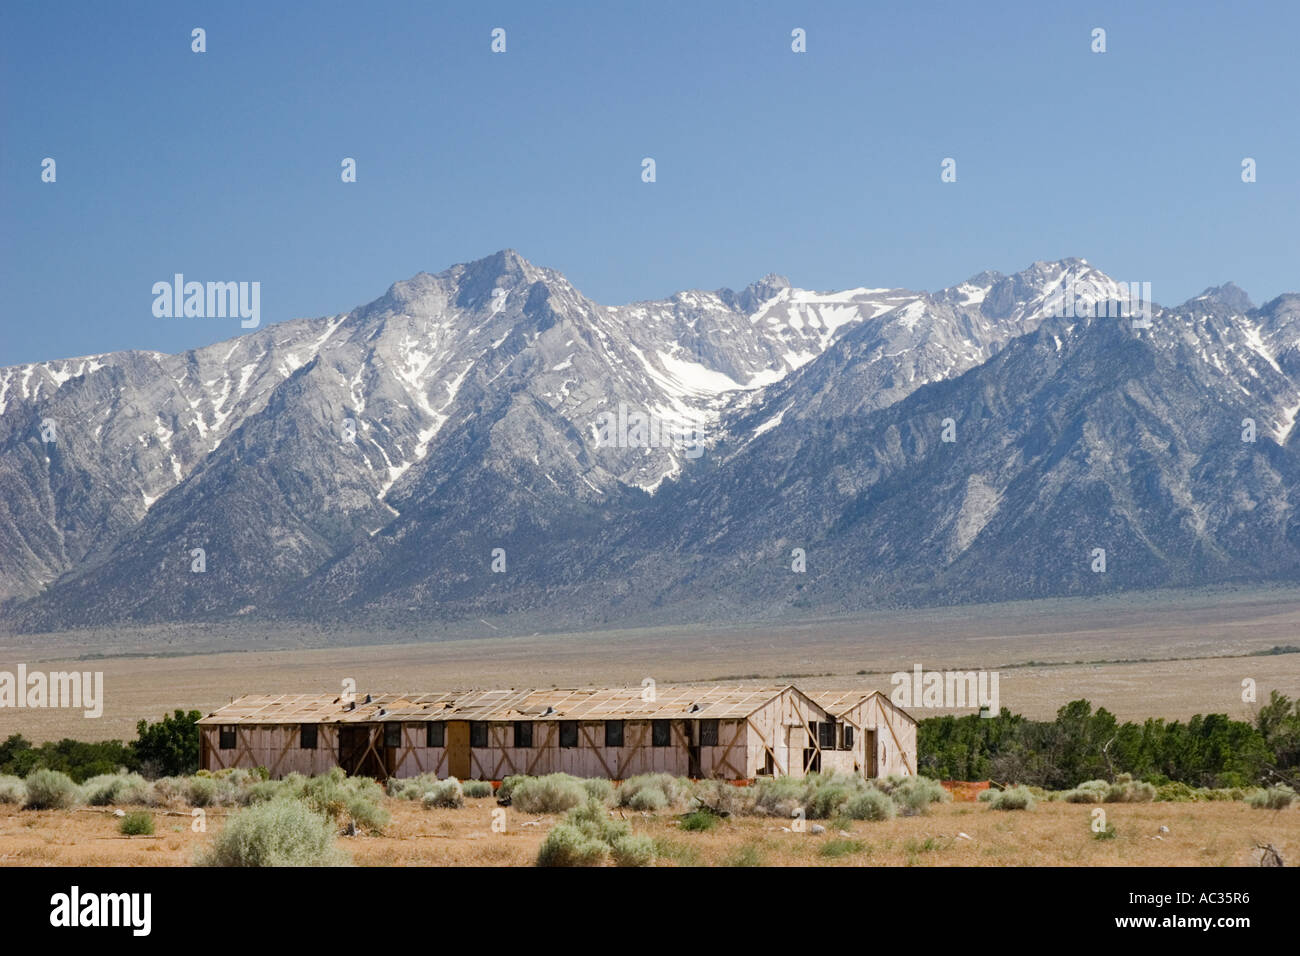 Barracks at Manzanar National Historic Site in the Owens Valley, Eastern Sierra Nevada Mountains, California, USA. Stock Photo